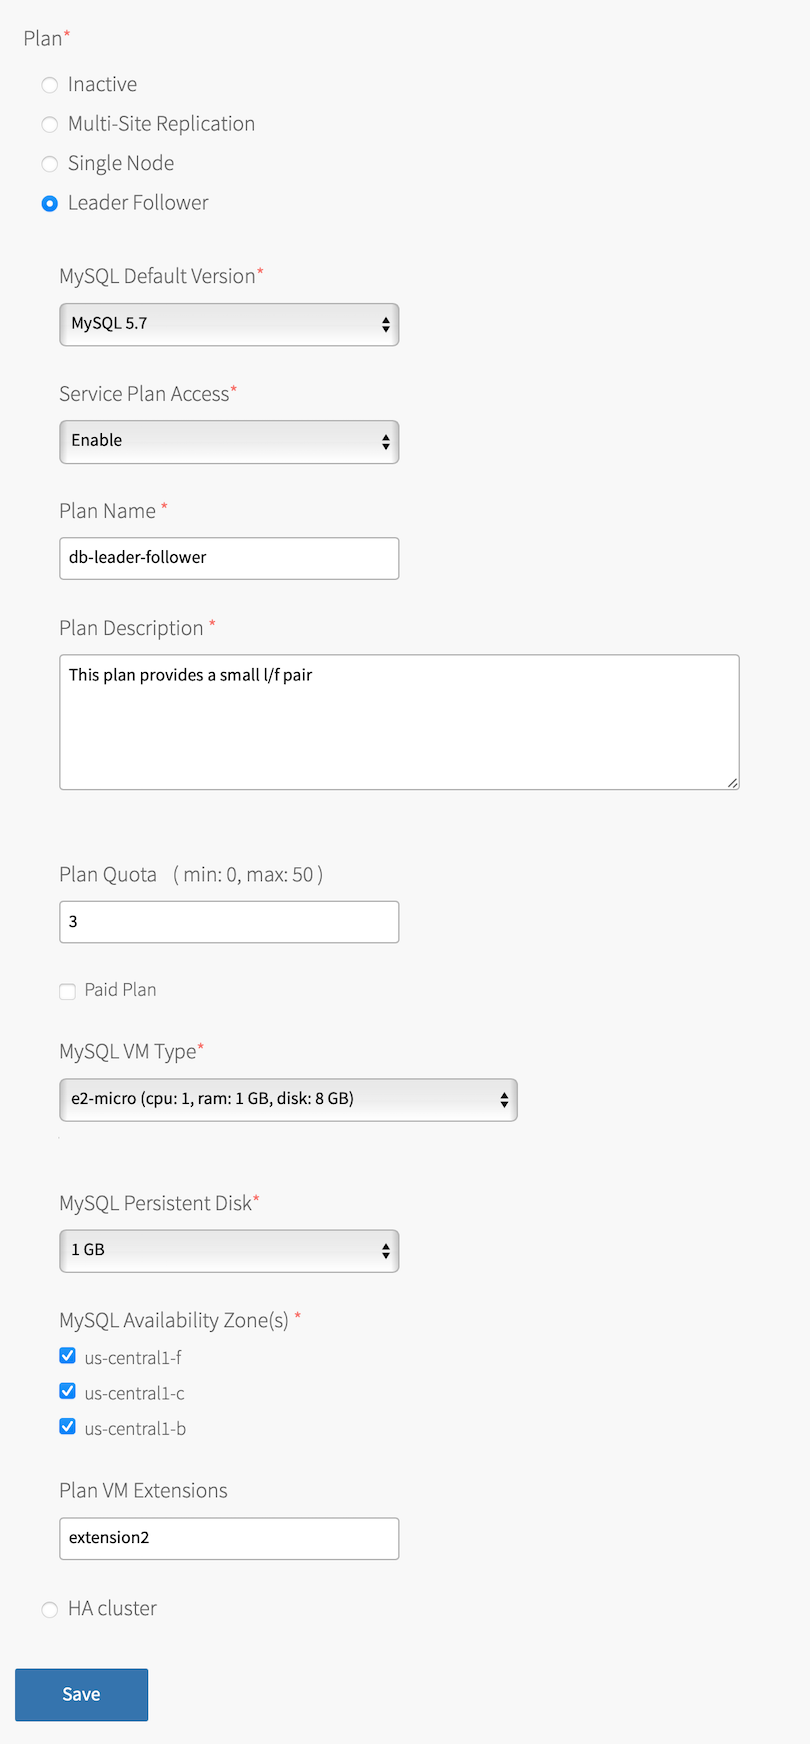 The 'Plan' section is shown and the radio button next to 'Leader Follower' is selected. The table in the next step describes the fields that are revealed after selecting this plan.